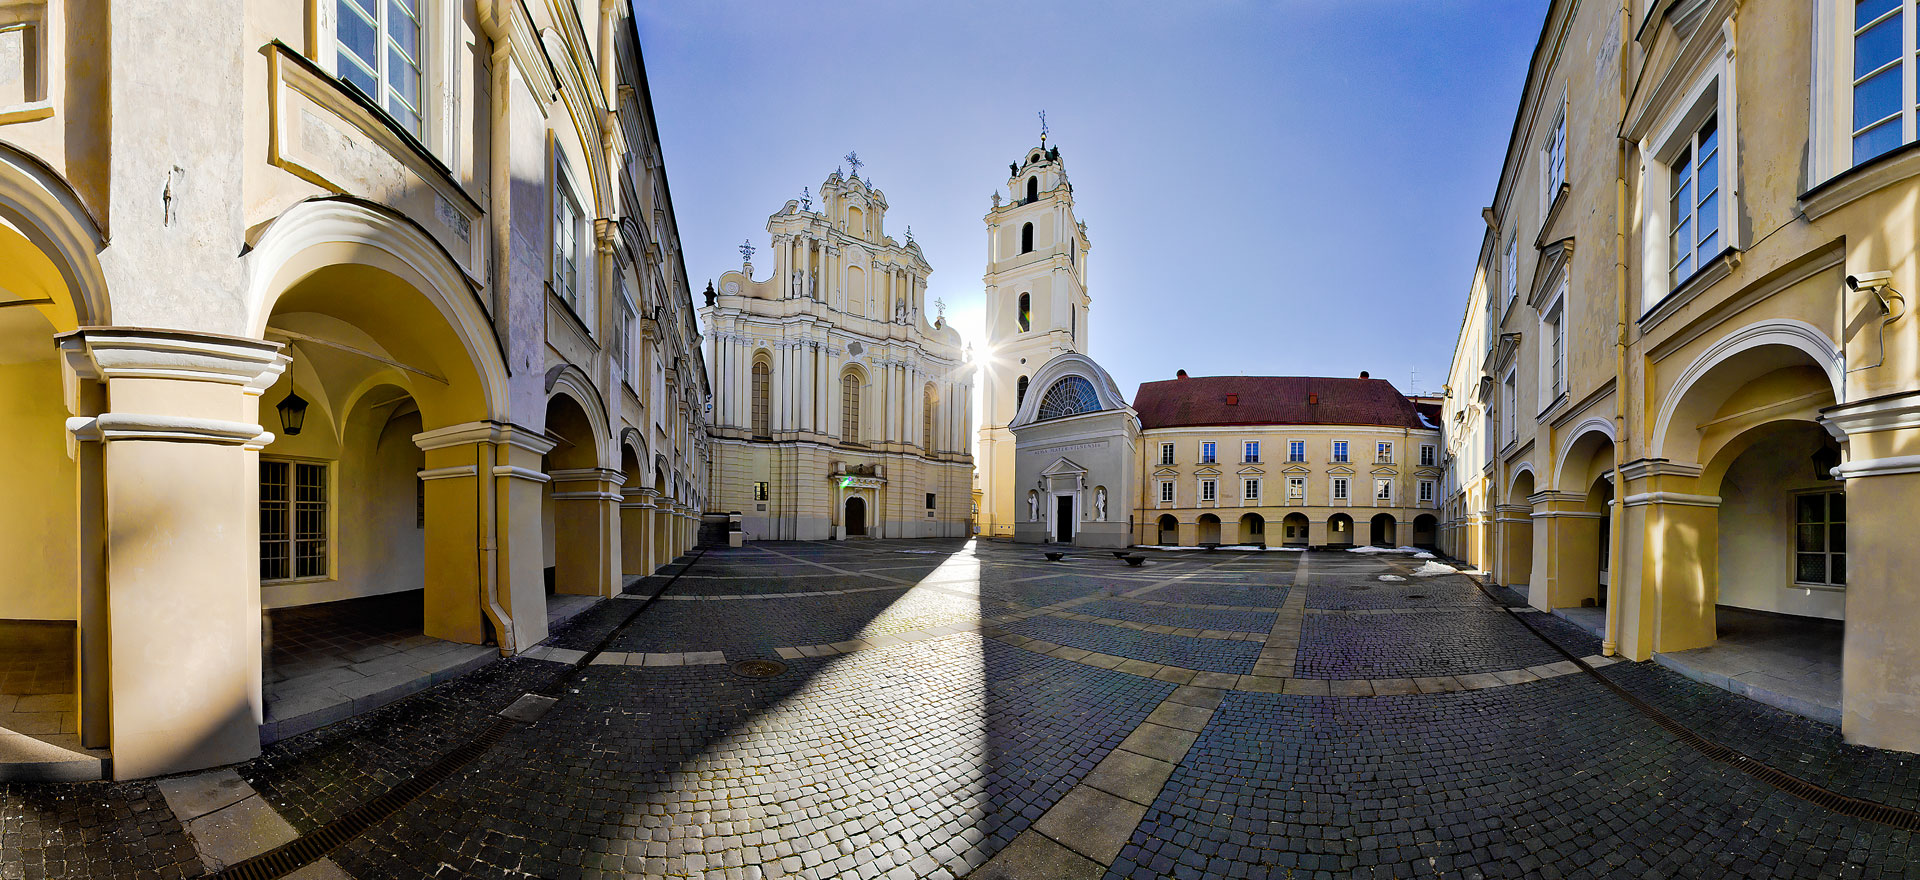 Historic buildings in Vilnius - Lithuania Holidays and Tours